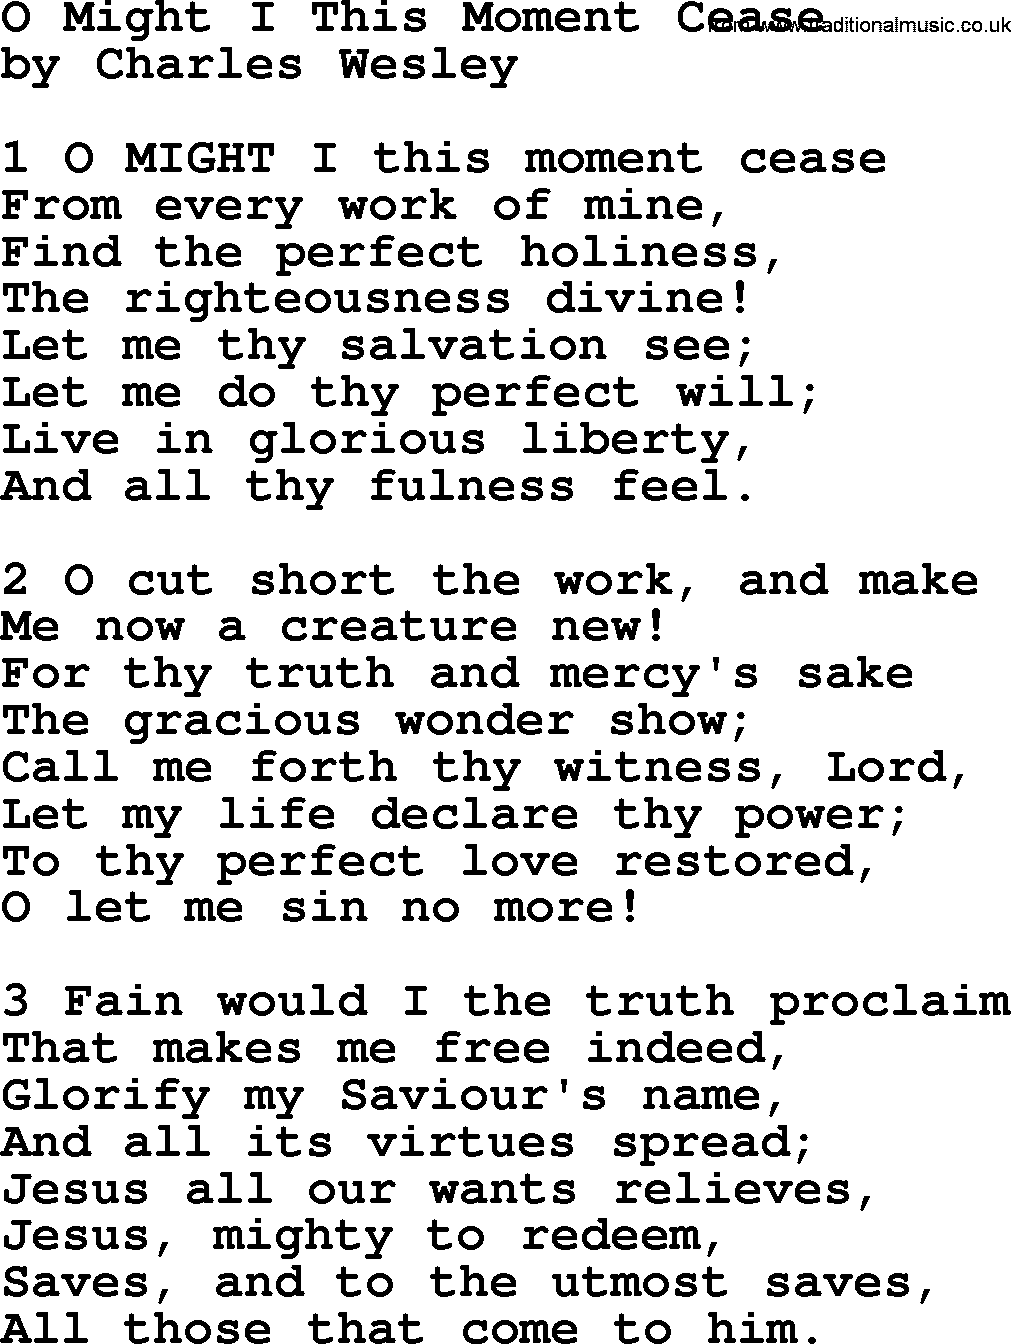 Charles Wesley hymn: O Might I This Moment Cease, lyrics